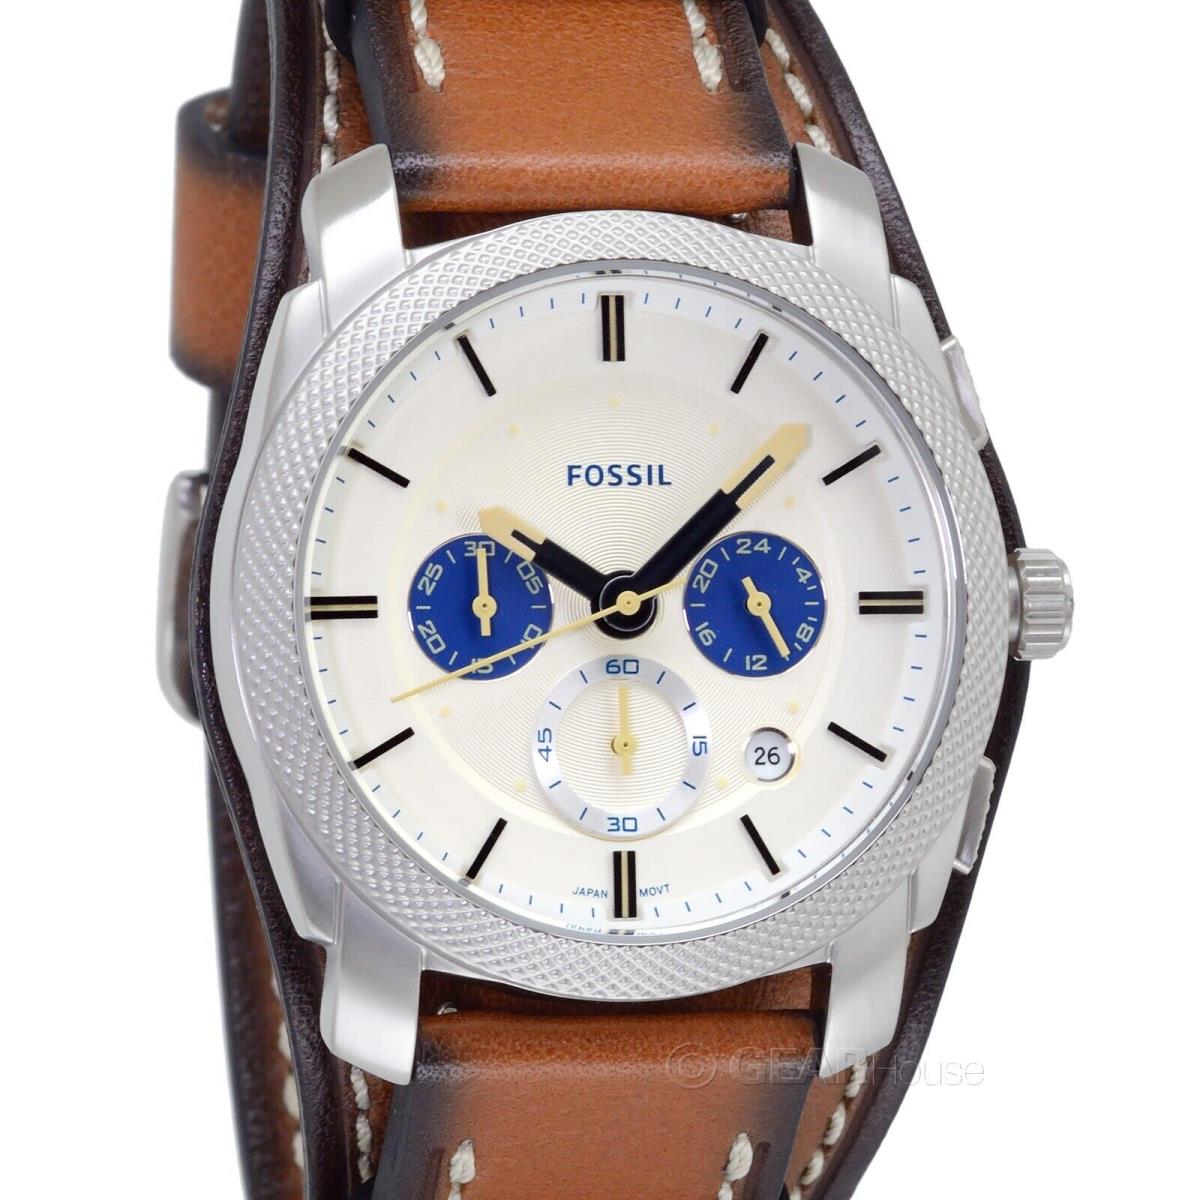 Fossil Machine Mens Chronograph Watch White Dial Brown Leather Bund Strap - Dial: White, Band: Brown, Bezel: Silver